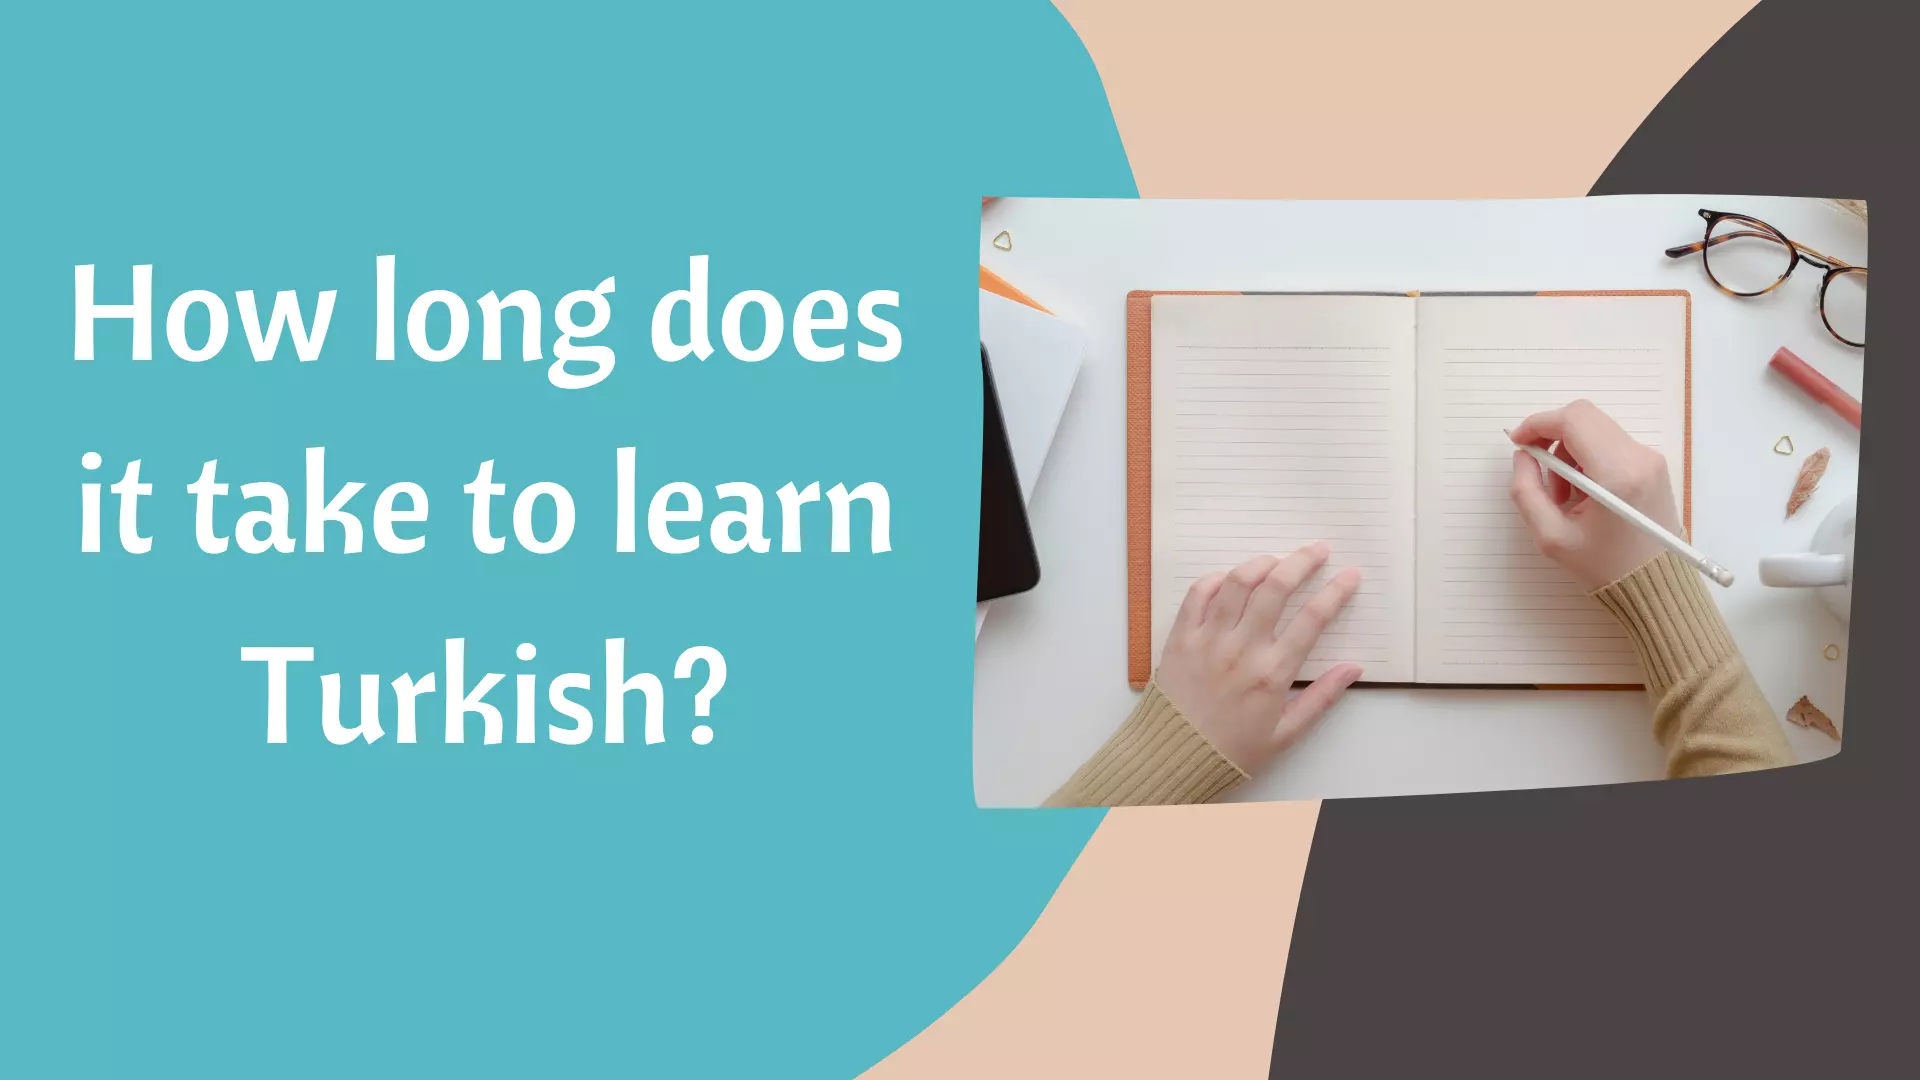 How long does it take to learn Turkish?